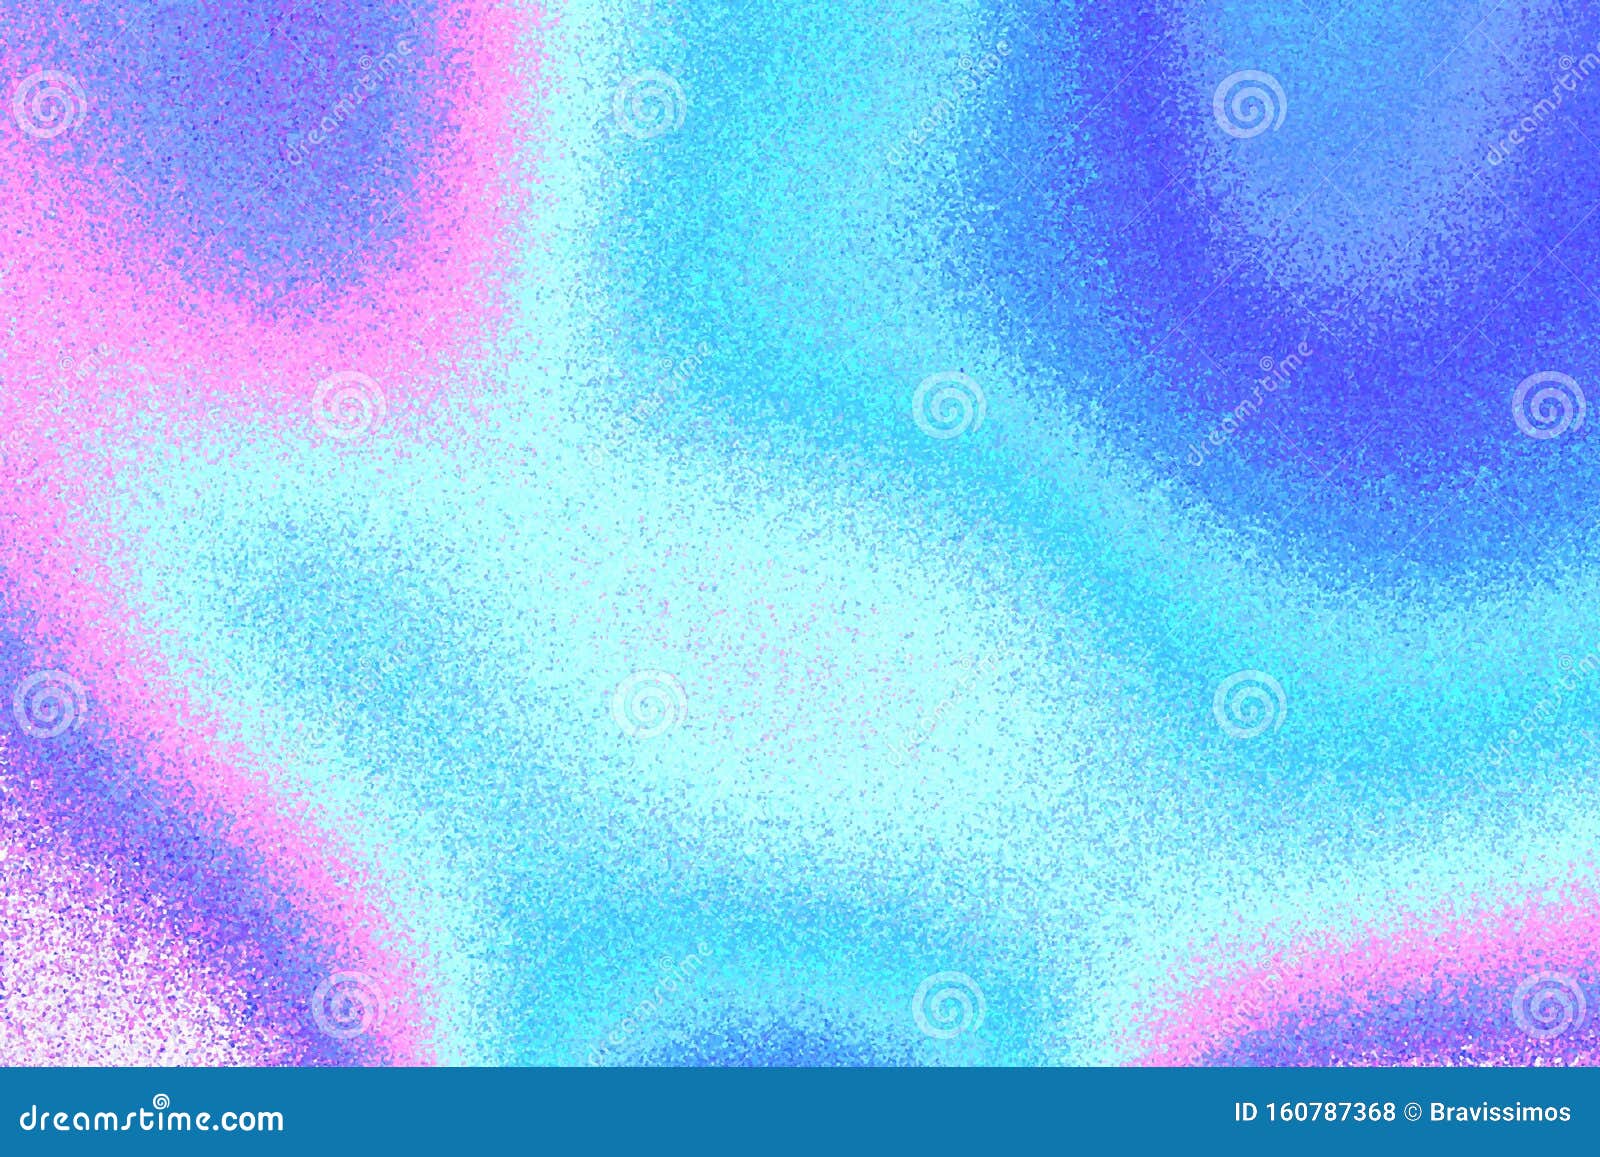 hologram texture abstract holographic background, iridescent